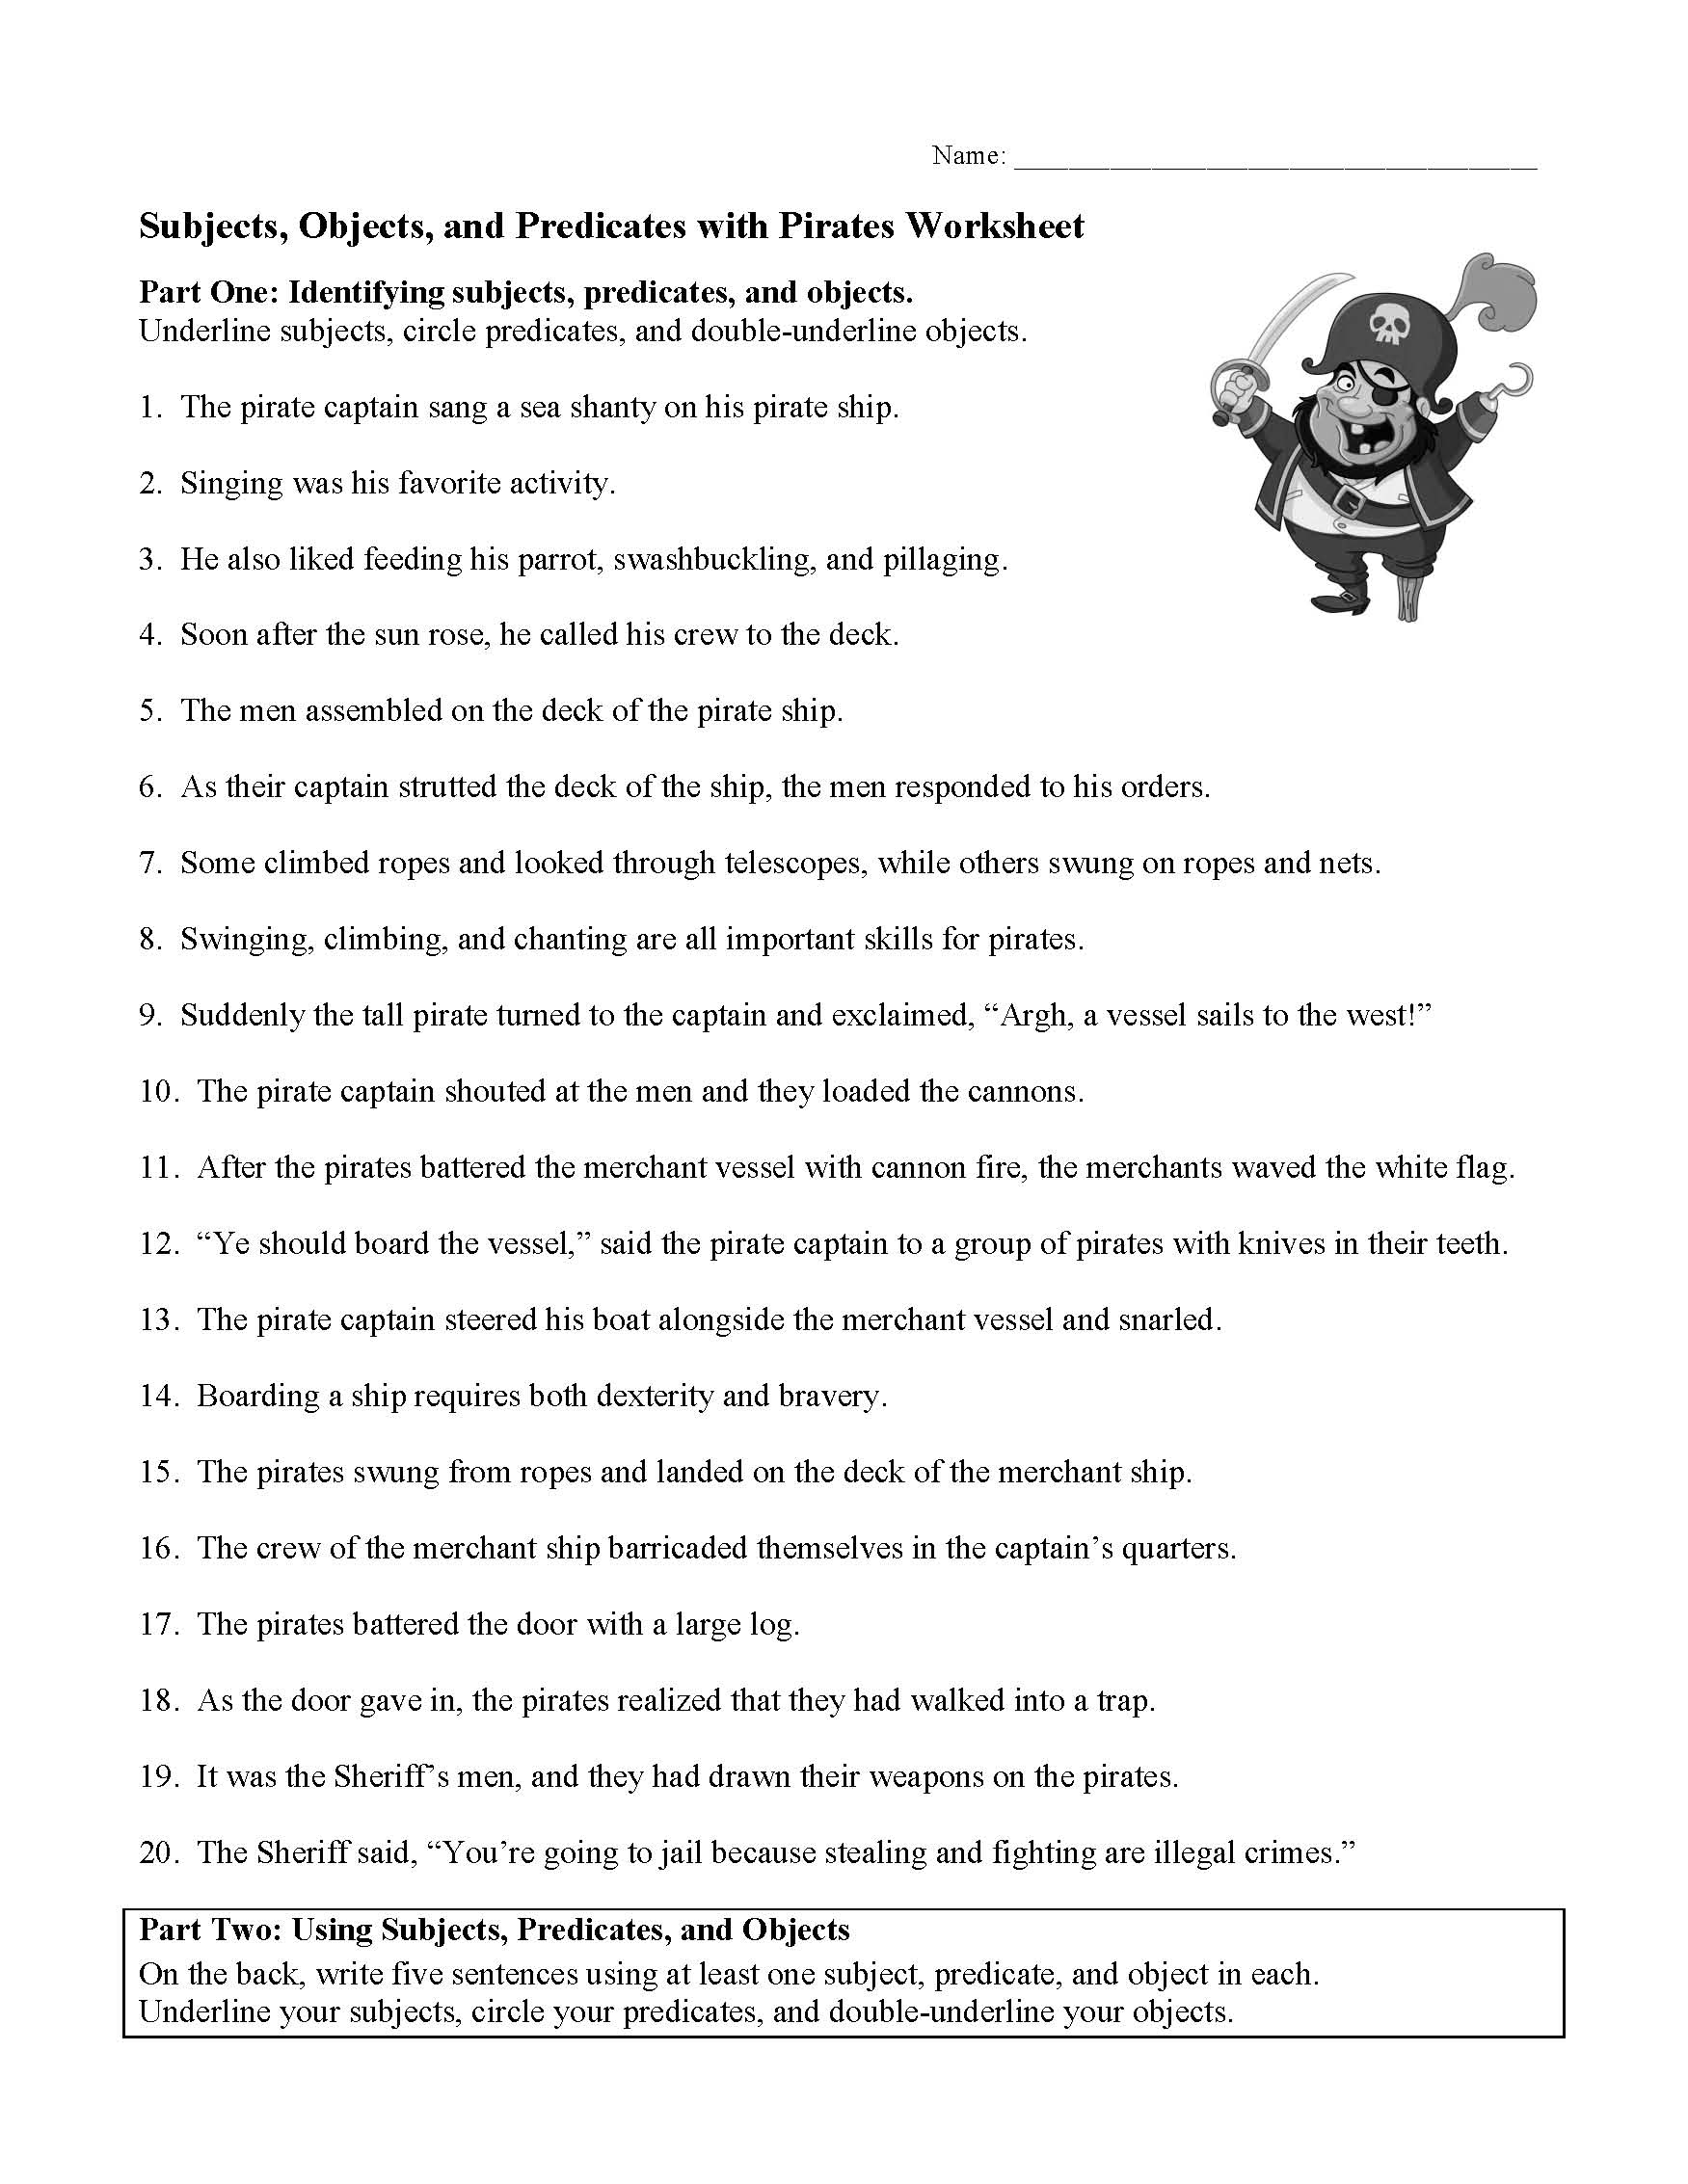 subjects-objects-and-predicates-with-pirates-worksheet-sentence-structure-activity